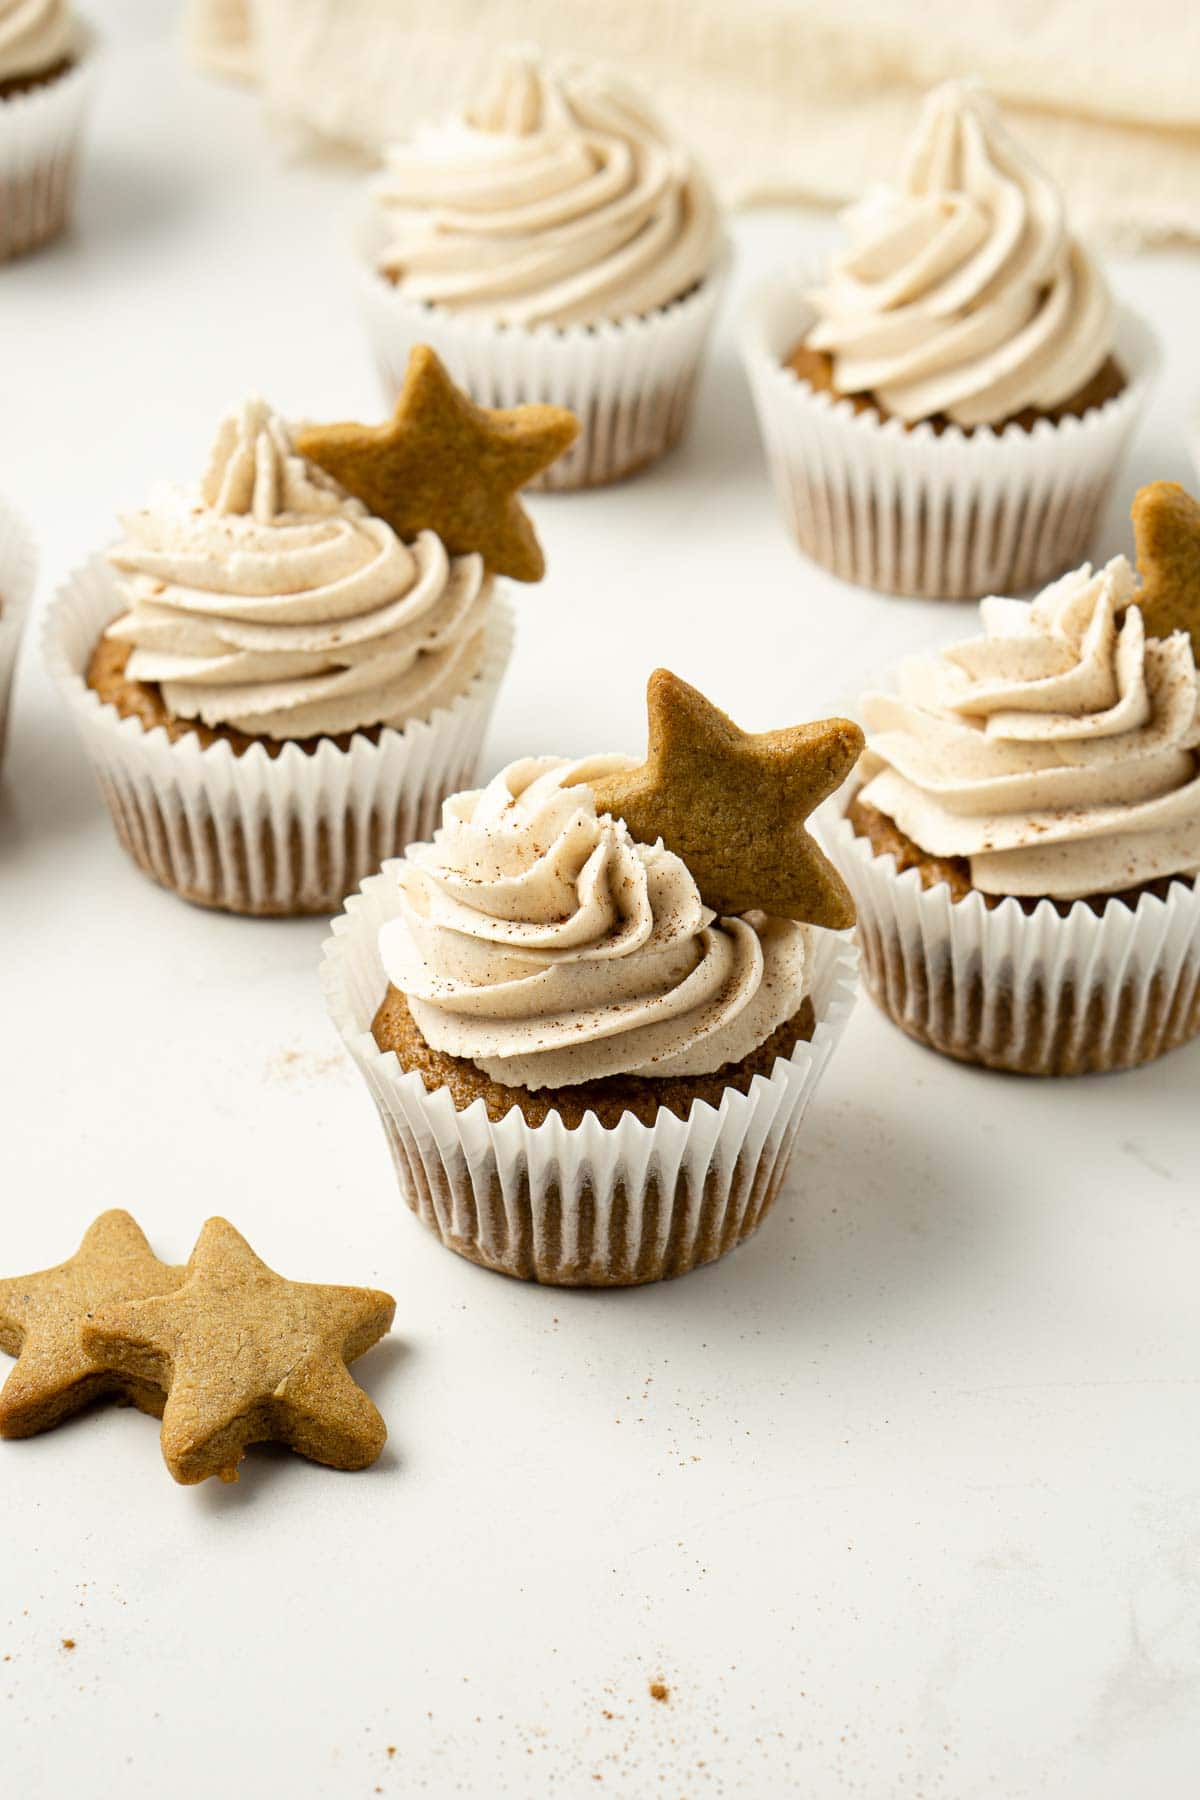 Group of vegan gingerbread cupcakes with cinnamon buttercream and mini gingerbread cookies.